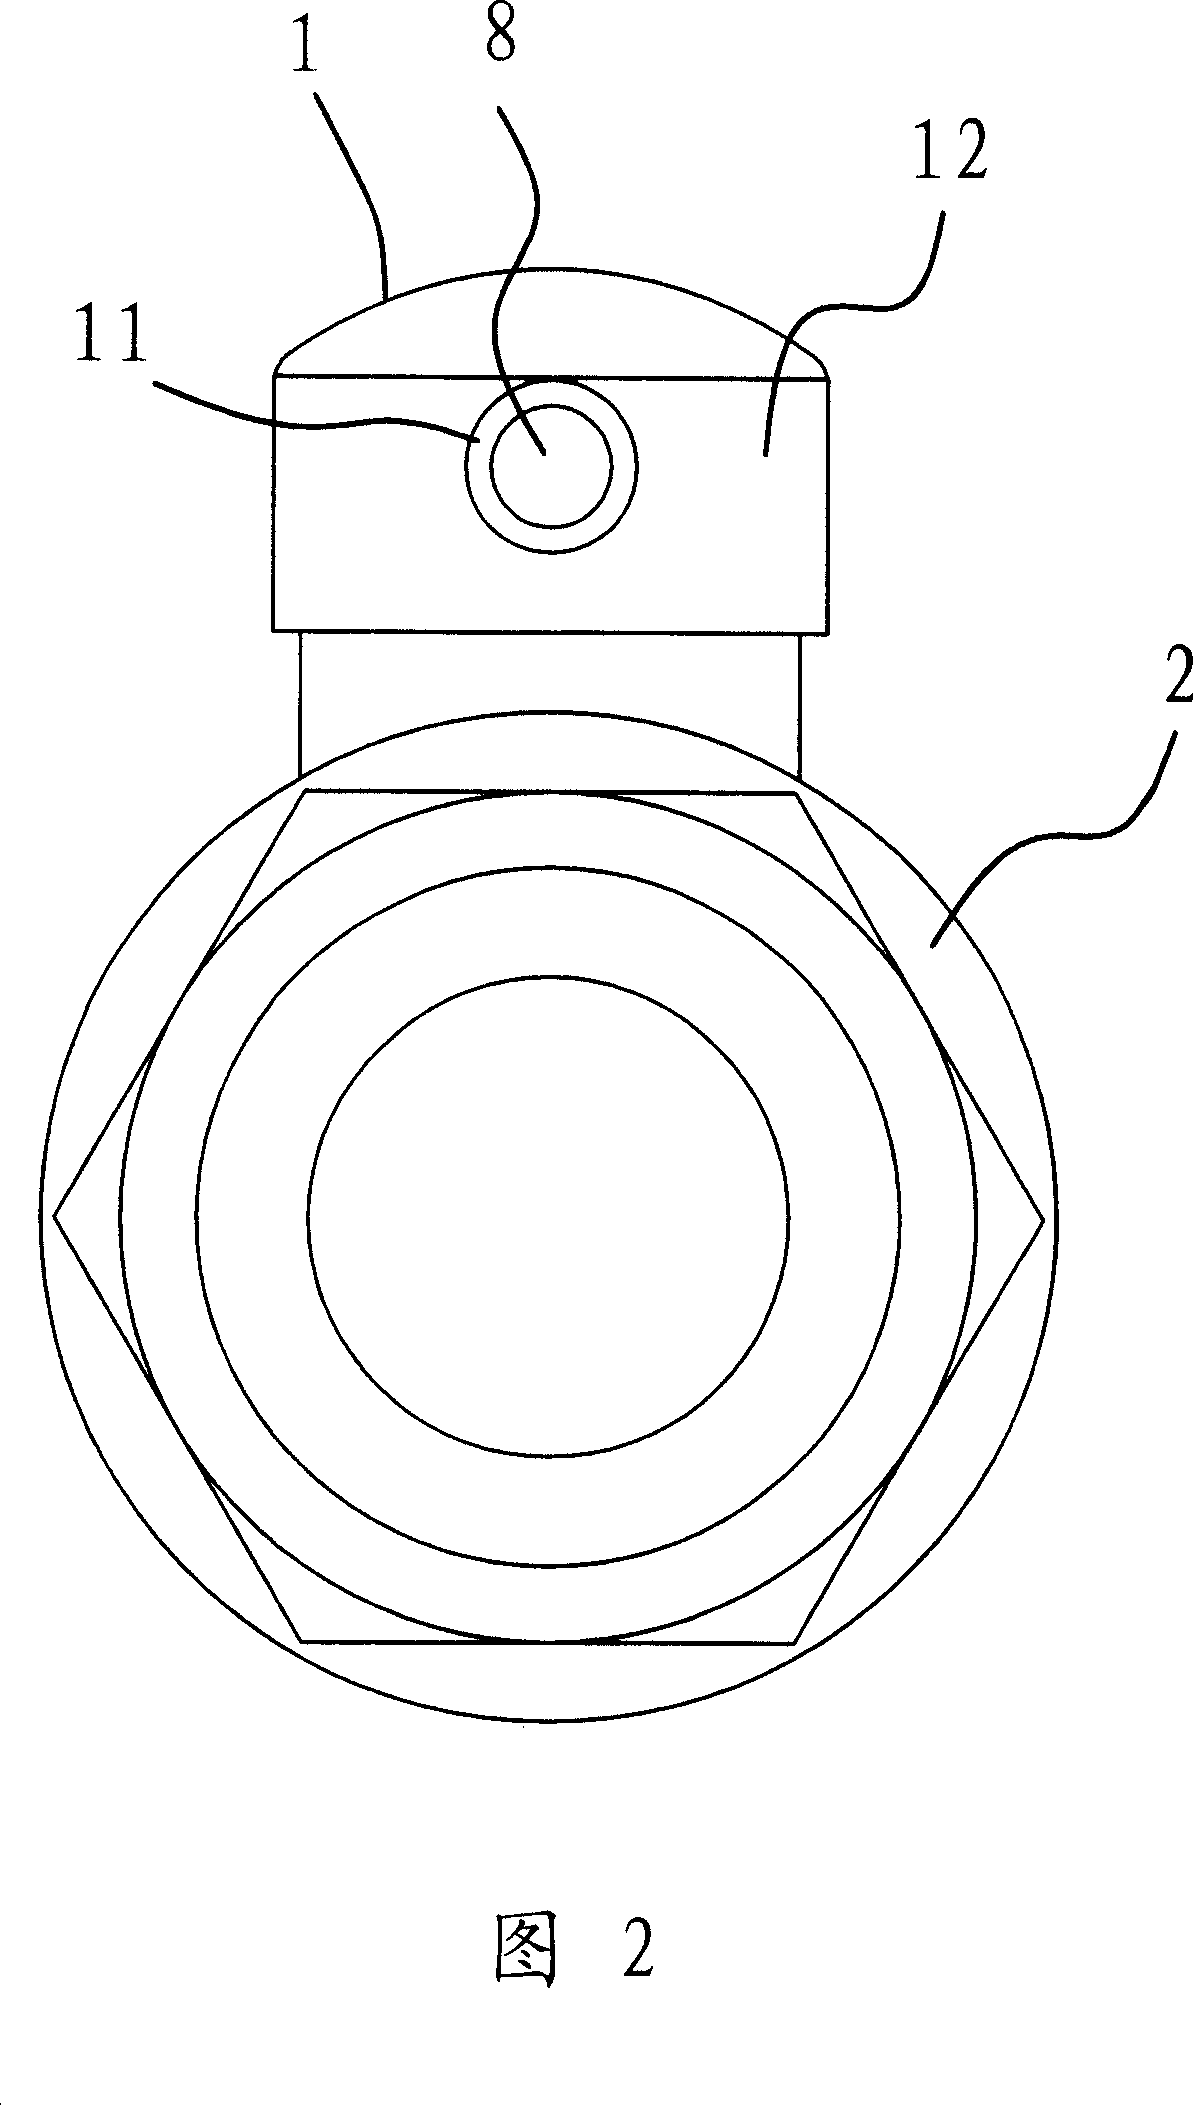 Connection structure for ball valve handle